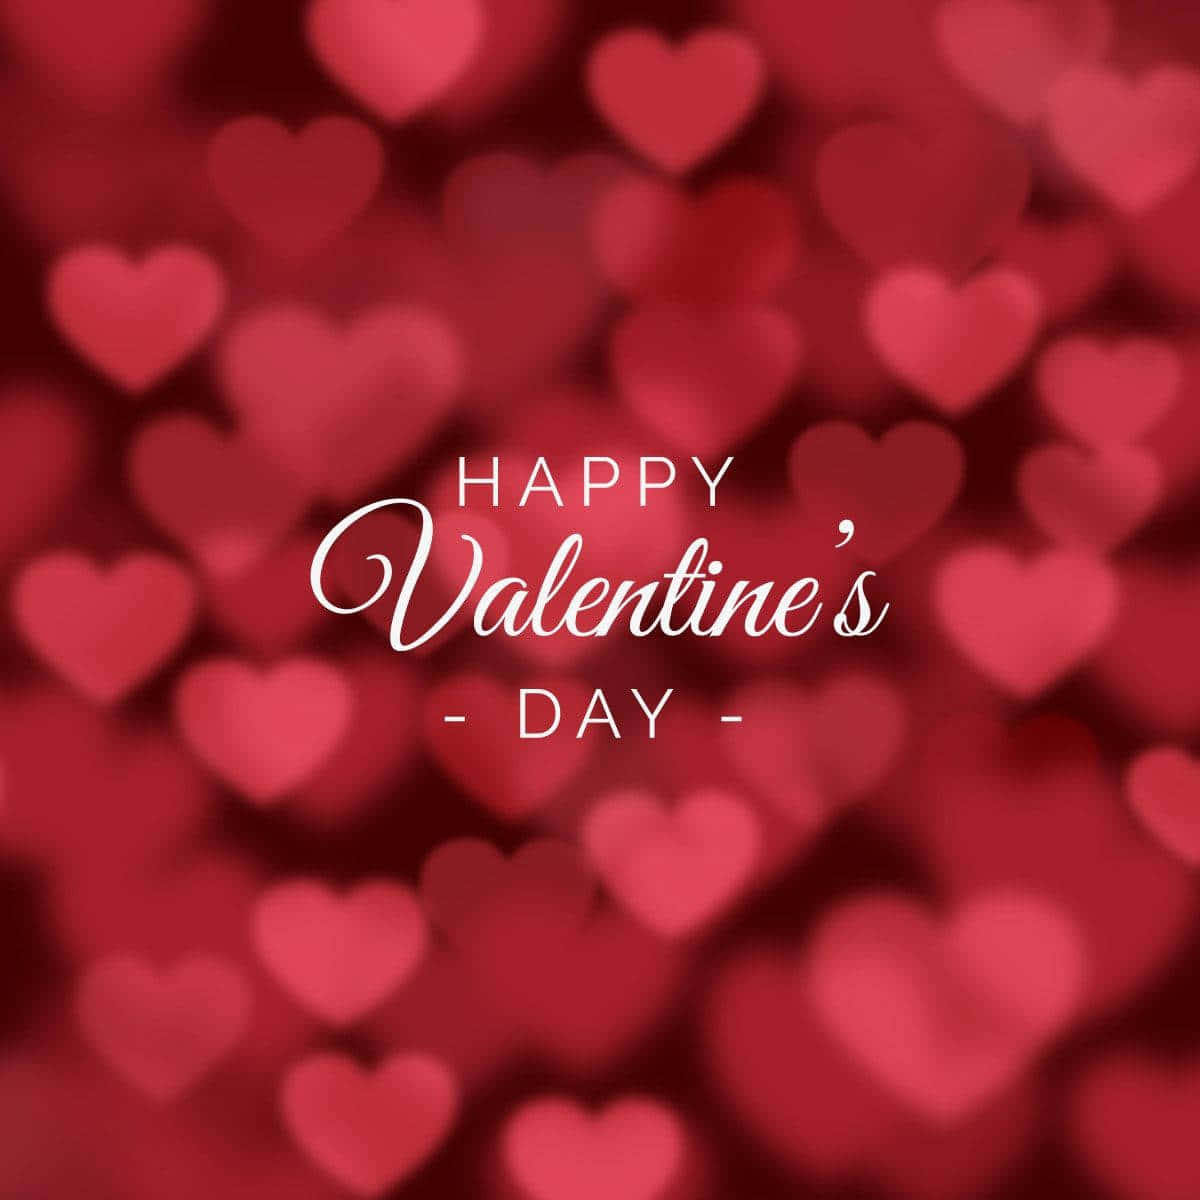 Happy Valentine's Day Hearts Bokeh Pictures 1200 x 1200 Picture